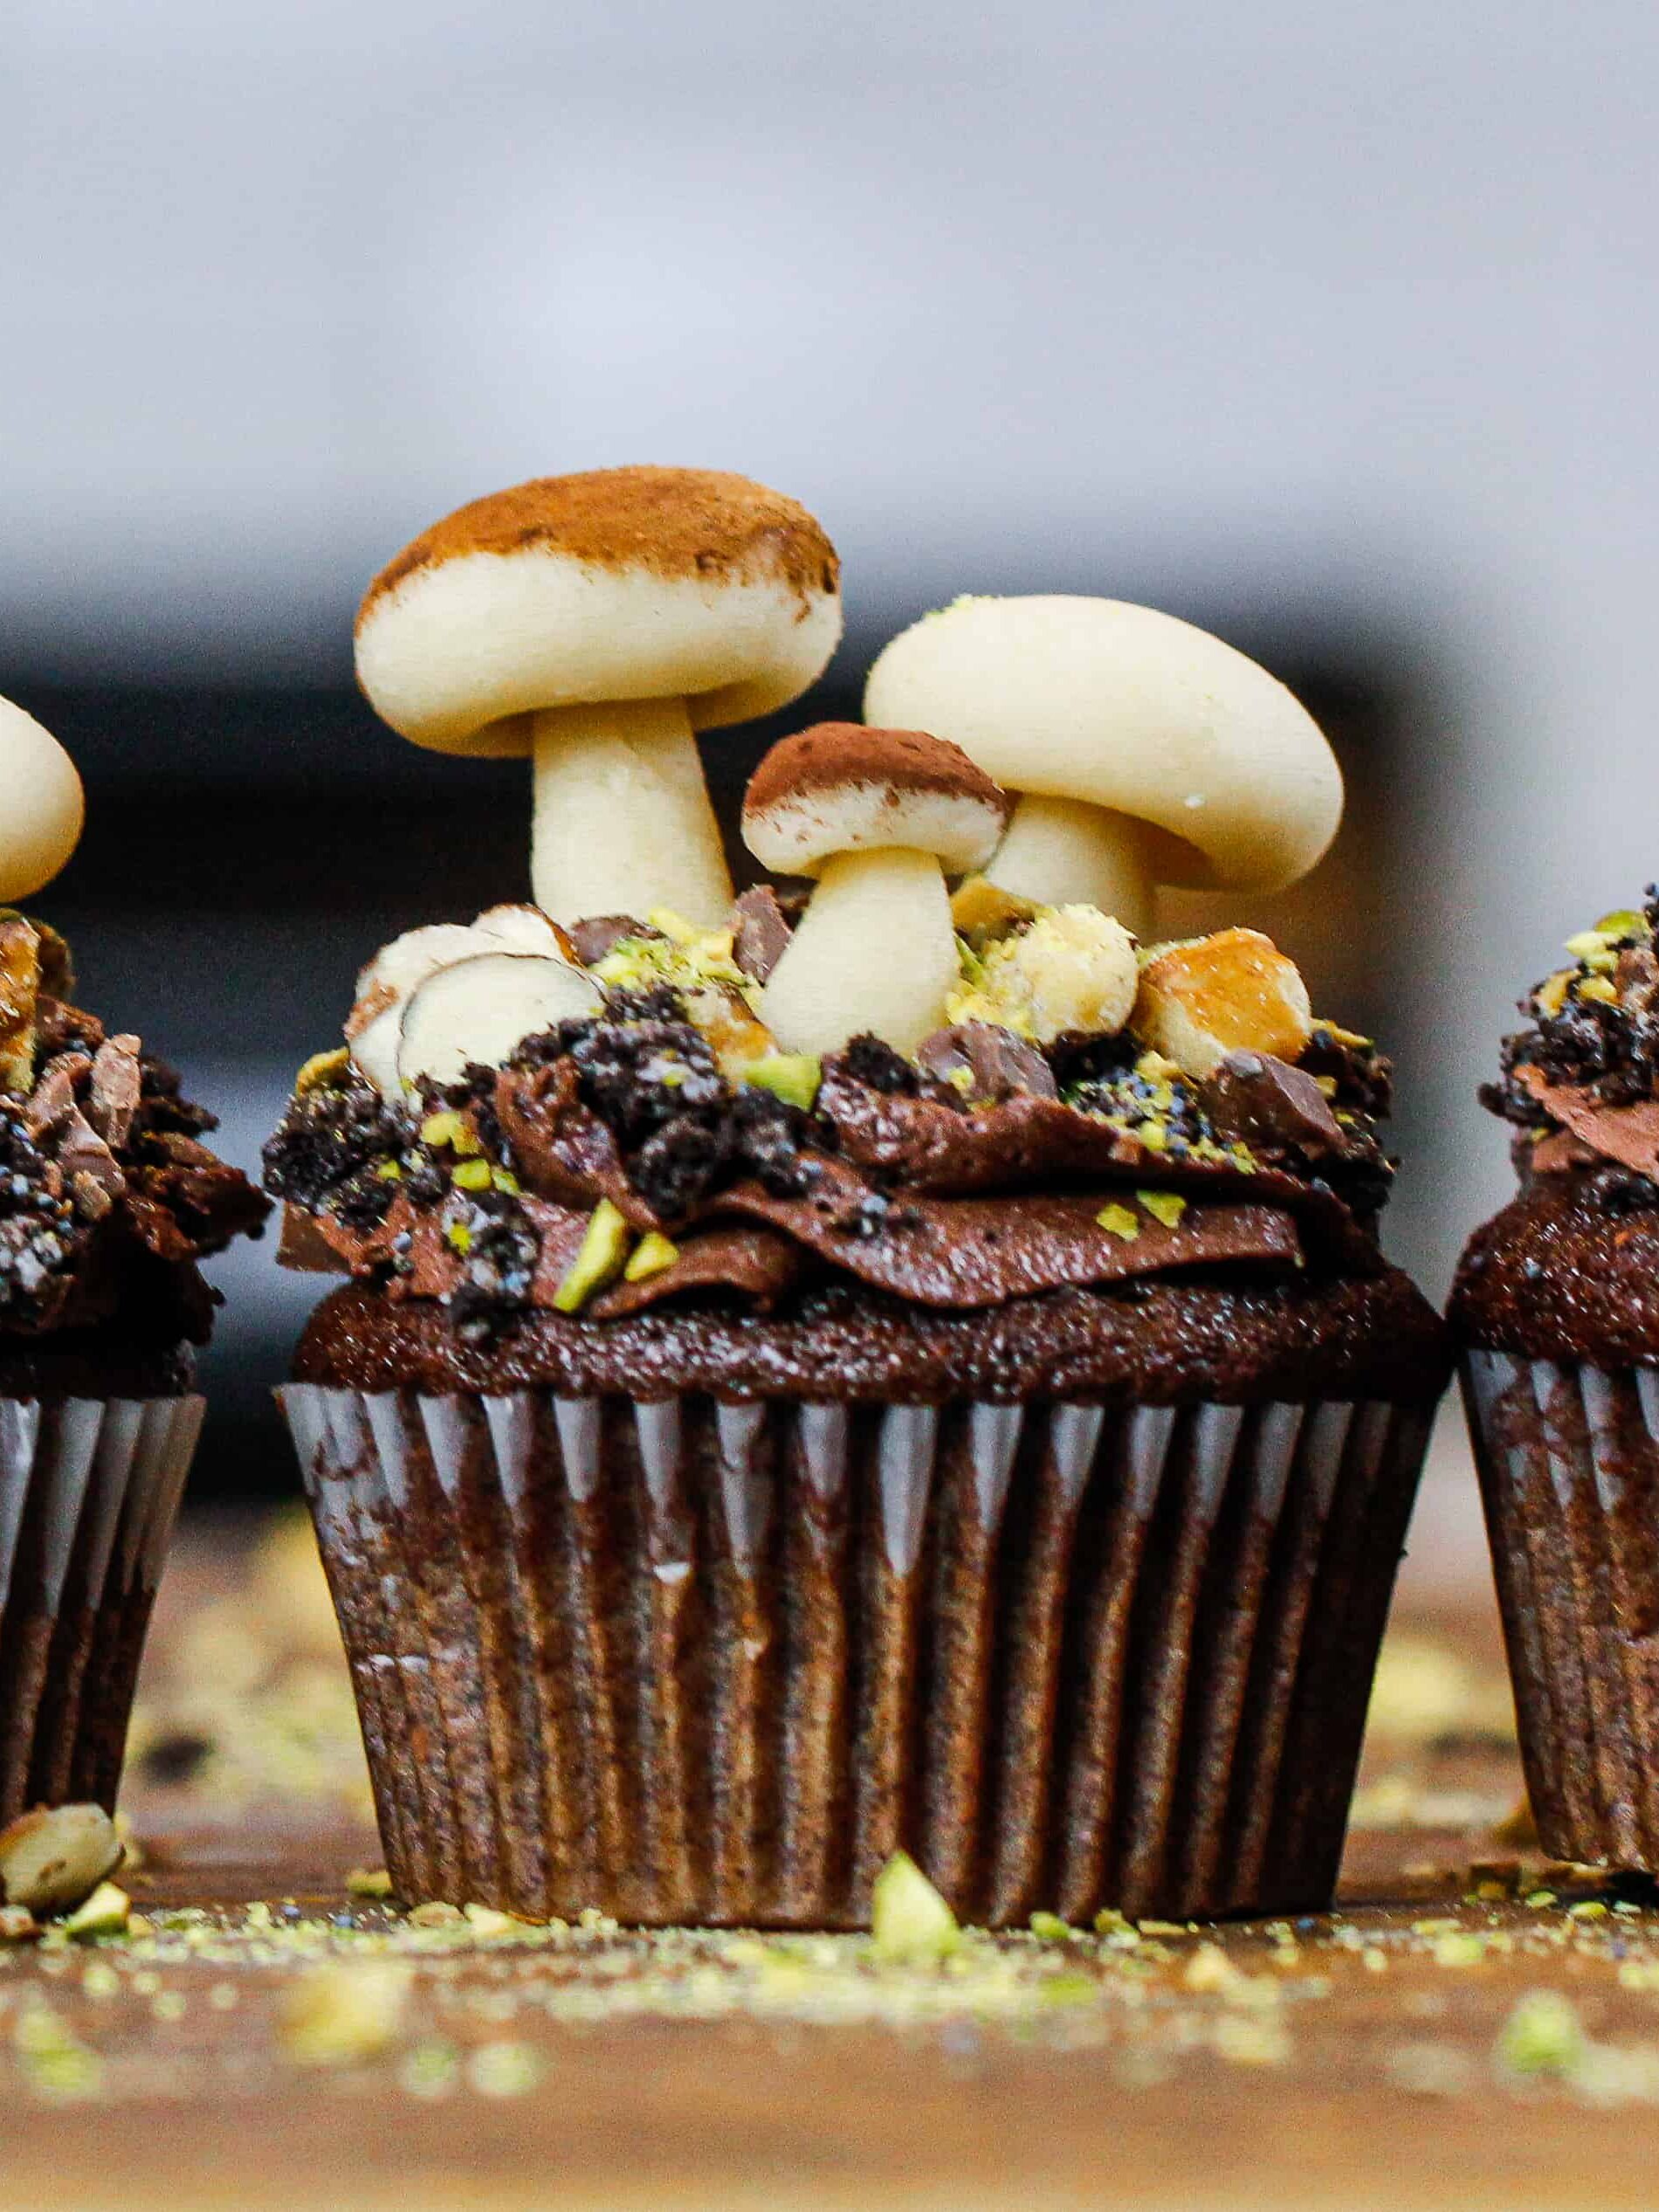 image of mushroom cupcakes made with chocolate buttercream and edible marzipan mushrooms